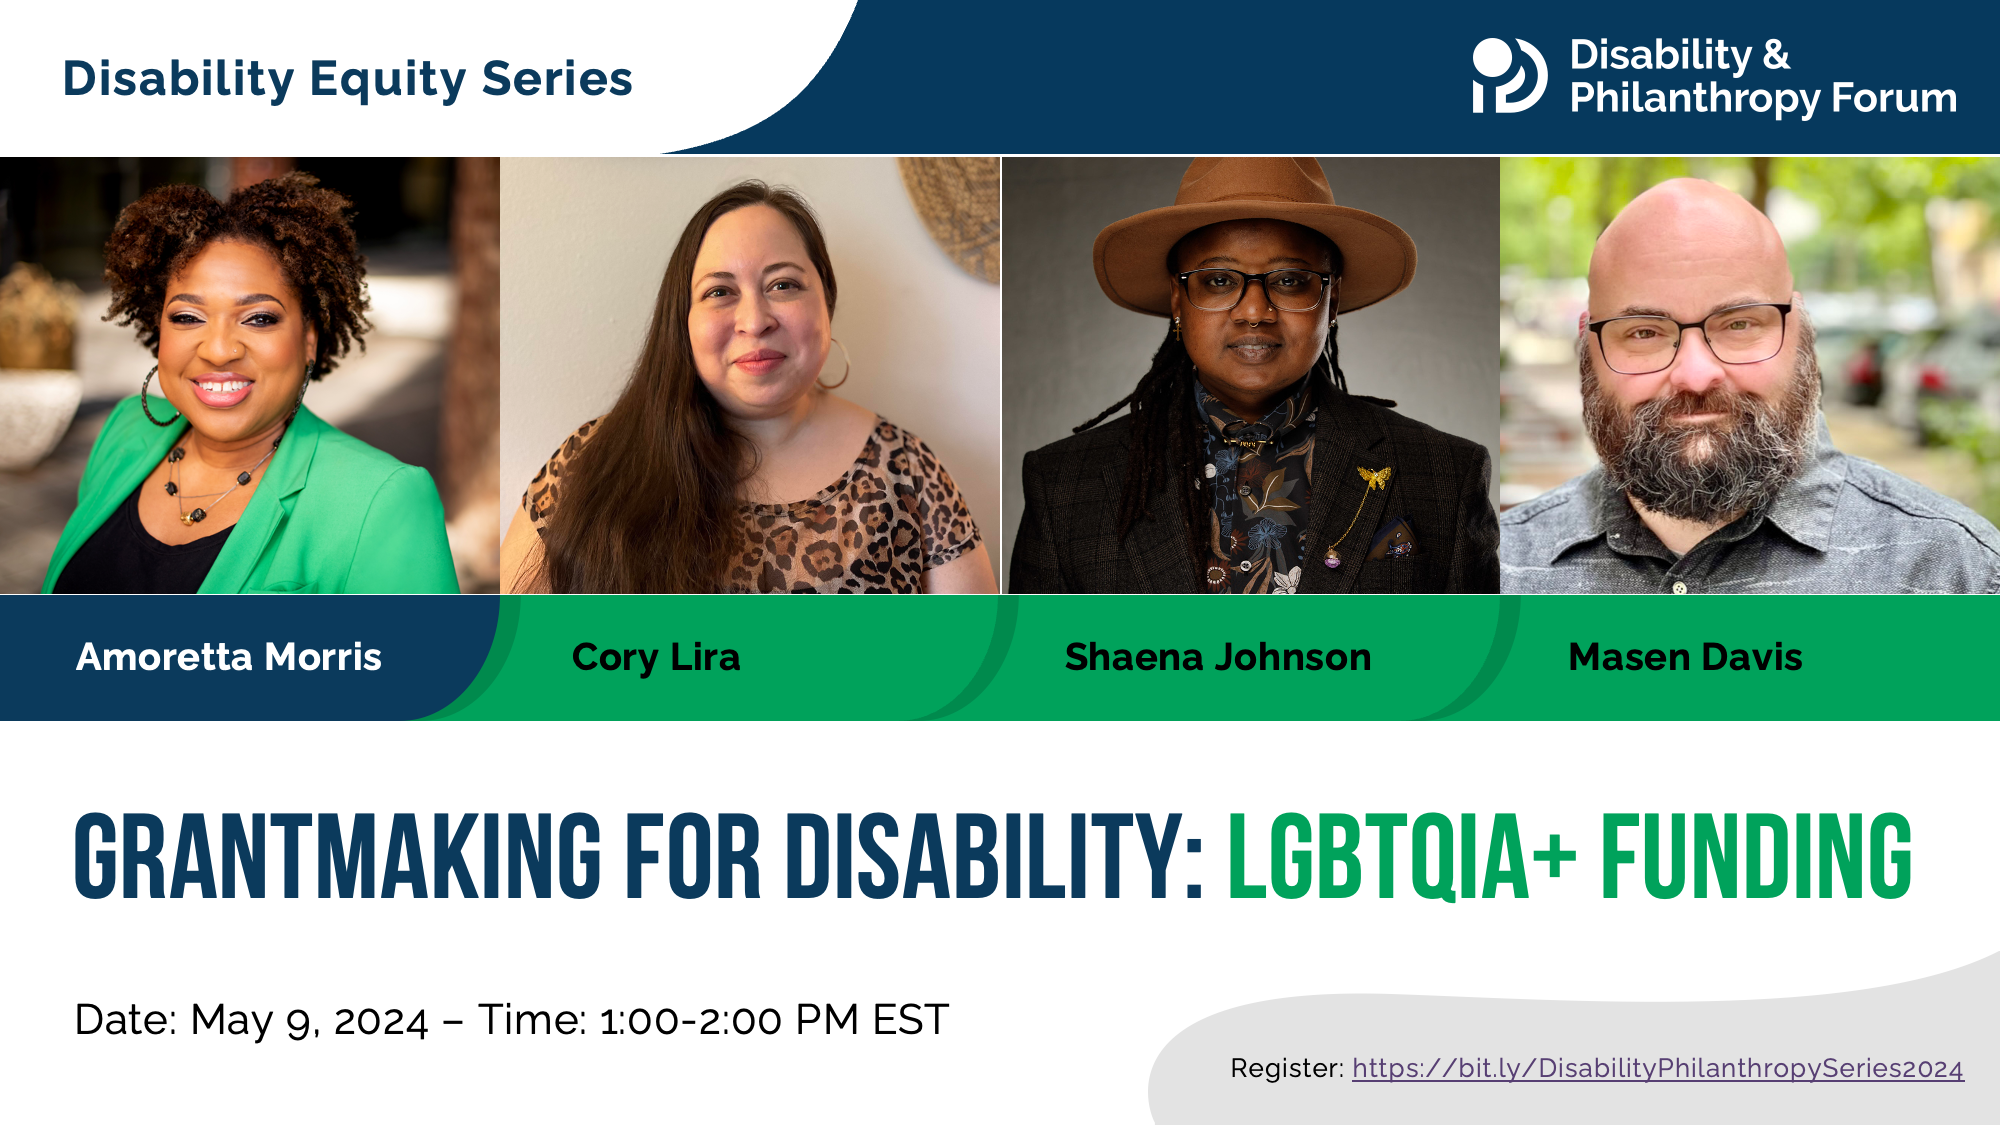 Blue and green graphic for the Disability Equity Series webinar entitled Grantmaking for Disability: LGBTQIA+ Funding. The date of the event is May 9, 2024 at 1:00pm ET. Featuring photos of moderator Amoretta Morris and panelists Cory Lira, Shaena Johnson, and Masen Davis.